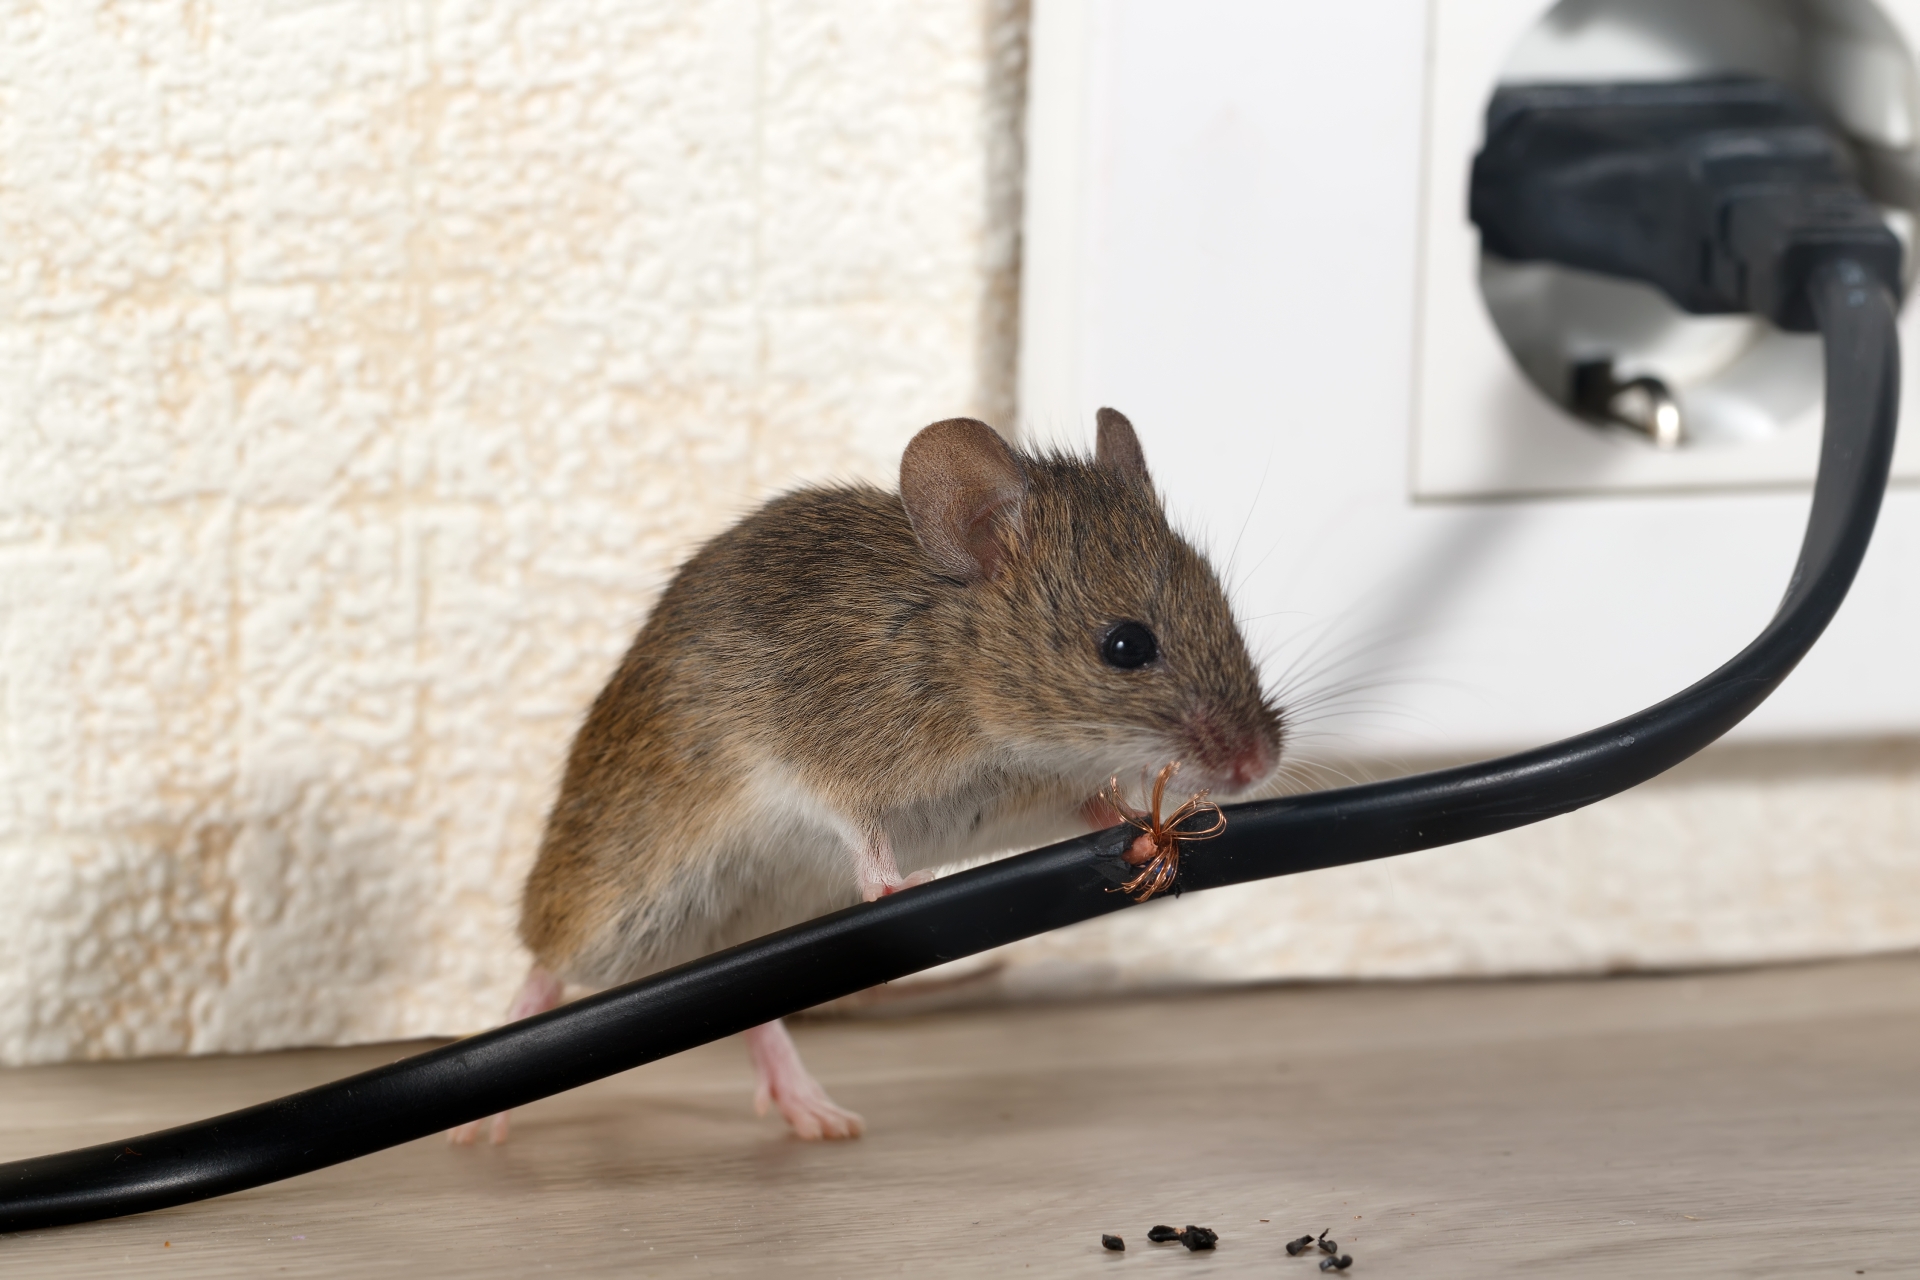 Mice Infestation, Pest Control in West Ealing, W13. Call Now 020 8166 9746